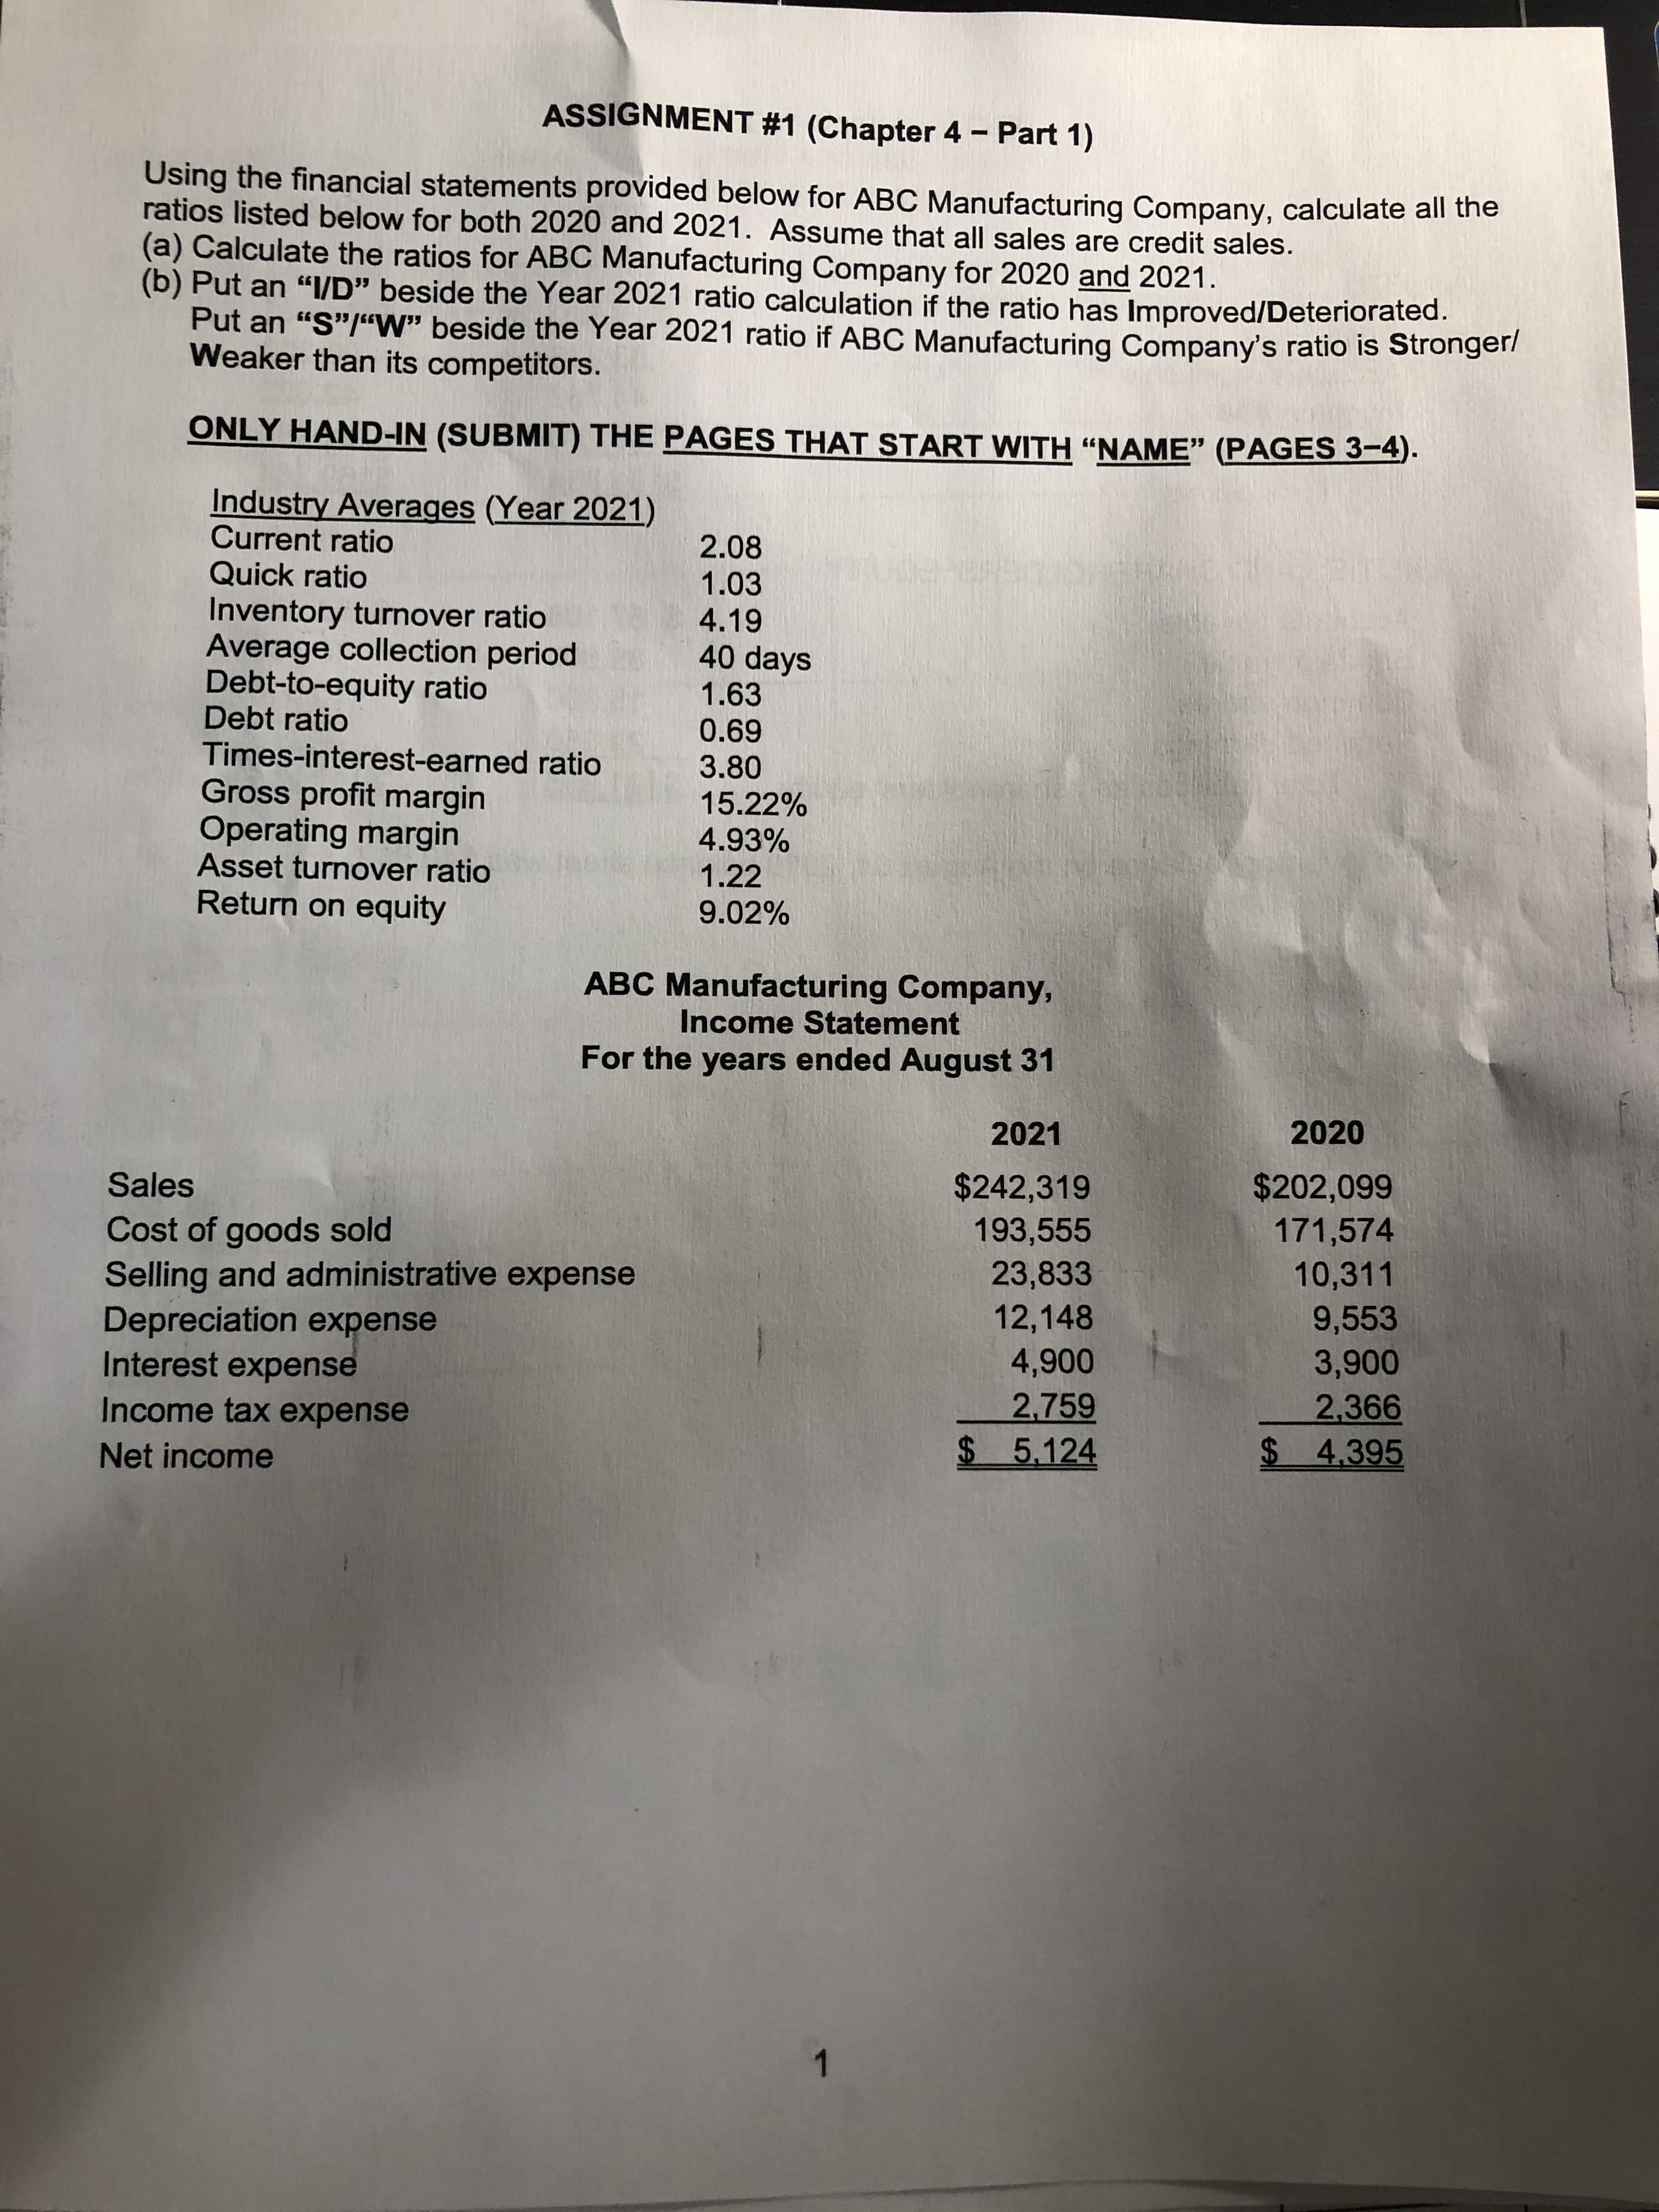 Using the financial statements provided below for ABC Manufacturing Company, calculate all the
ratios listed below for both 2020 and 2021. Assume that all sales are credit sales.
(a) Calculate the ratios for ABC Manufacturing Company for 2020 and 2021.
(b) Put an "l/D" beside the Year 2021 ratio calculation if the ratio has Improved/Deteriorated.
Put an "S"/"W" beside the Year 2021 ratio if ABC Manufacturing Company's ratio is Stronger/
Weaker than its competitors.
ONLY HAND-IN (SUBMIT) THE PAGES THAT START WITH "NAME" (PAGES 3-4).
Industry Averages (Year 2021)
Current ratio
Quick ratio
2.08
1.03
